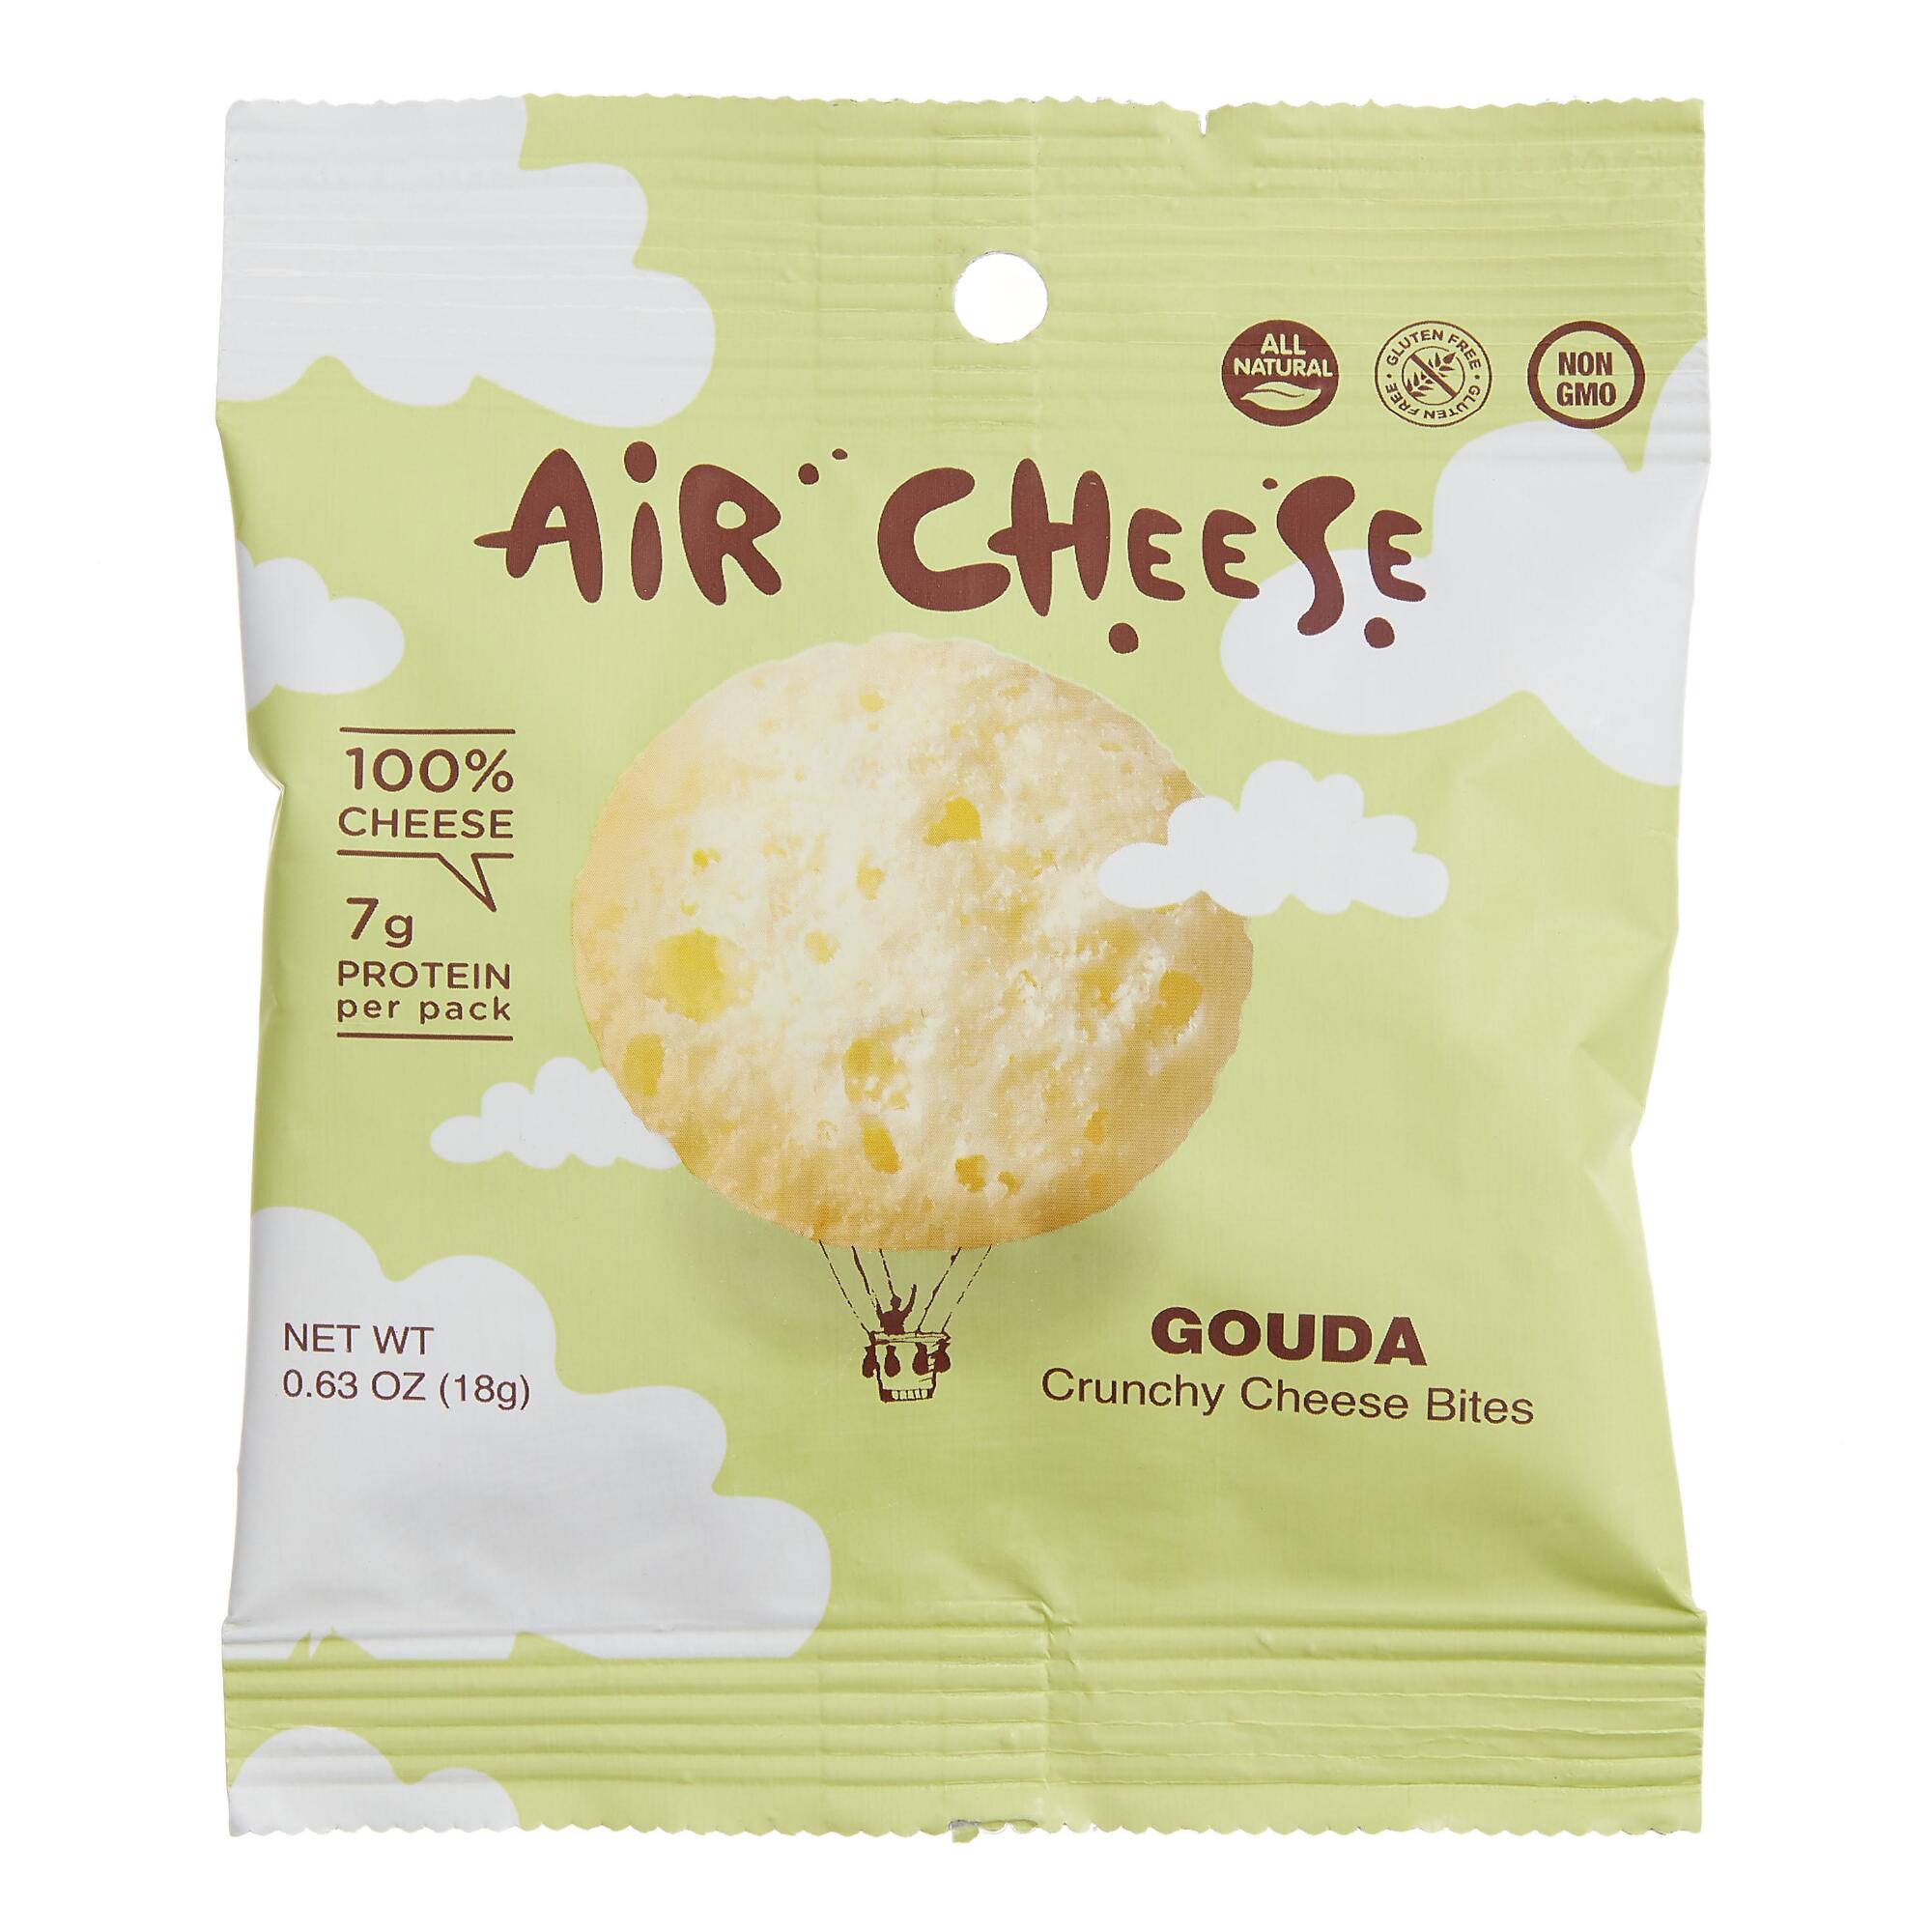 Air Cheese Gouda Crunchy Cheese Bites Snack Size Set of 6 by World Market